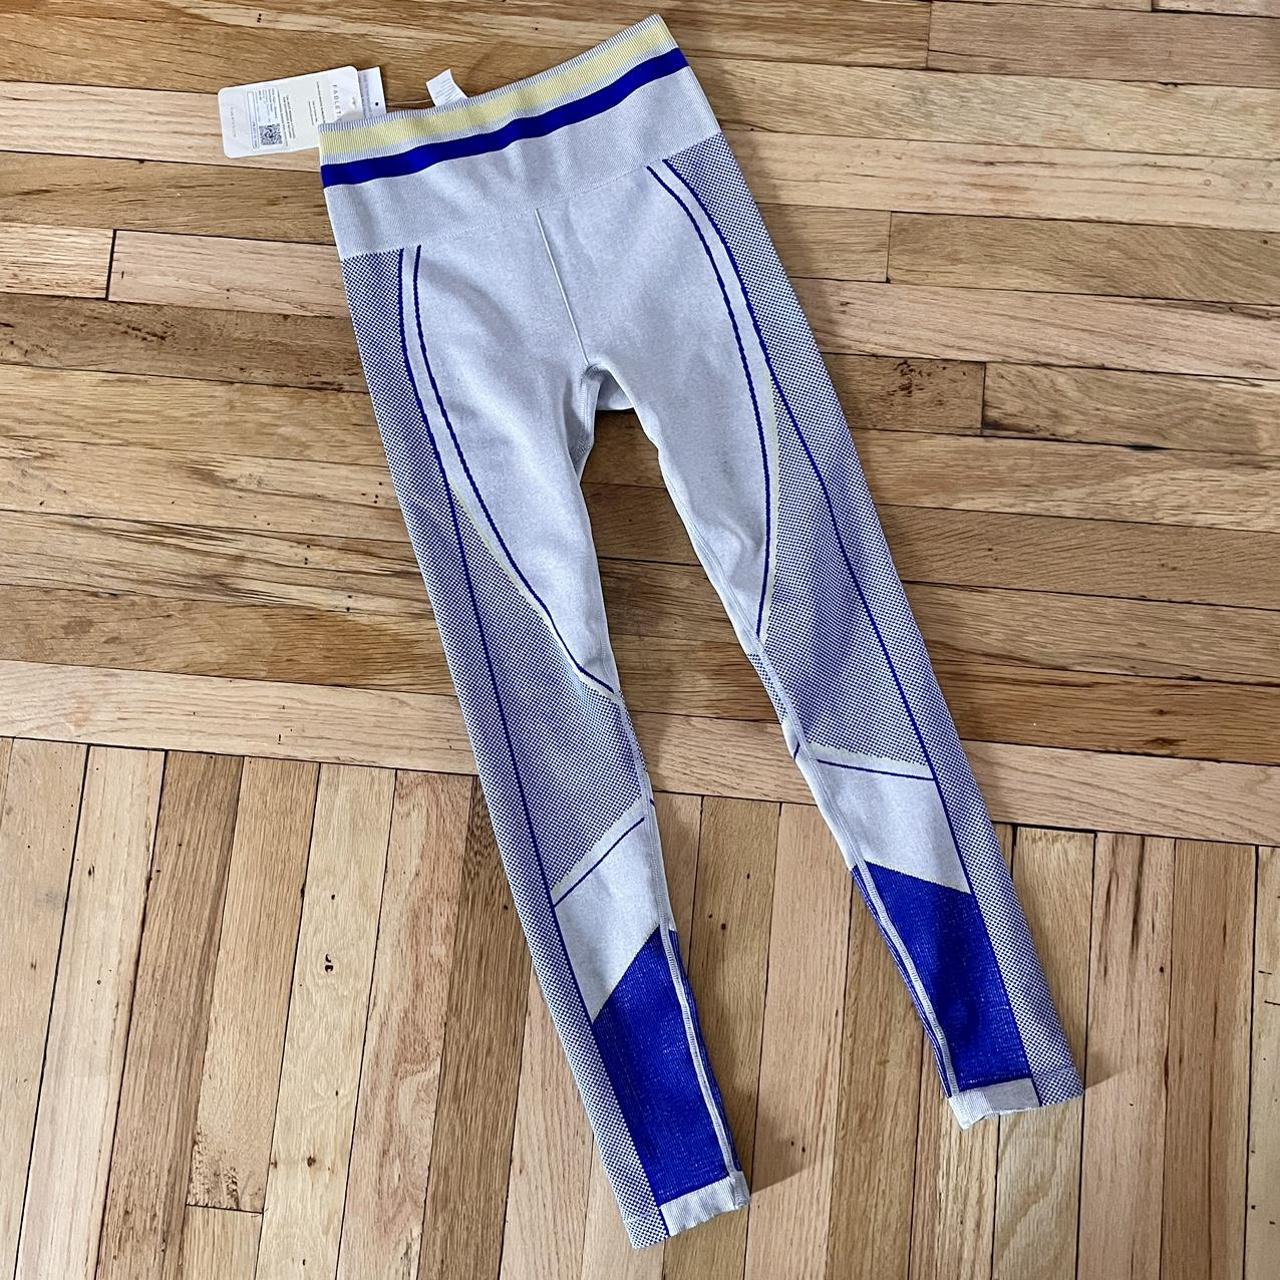 Fablectic NWT high waisted seamless leggings